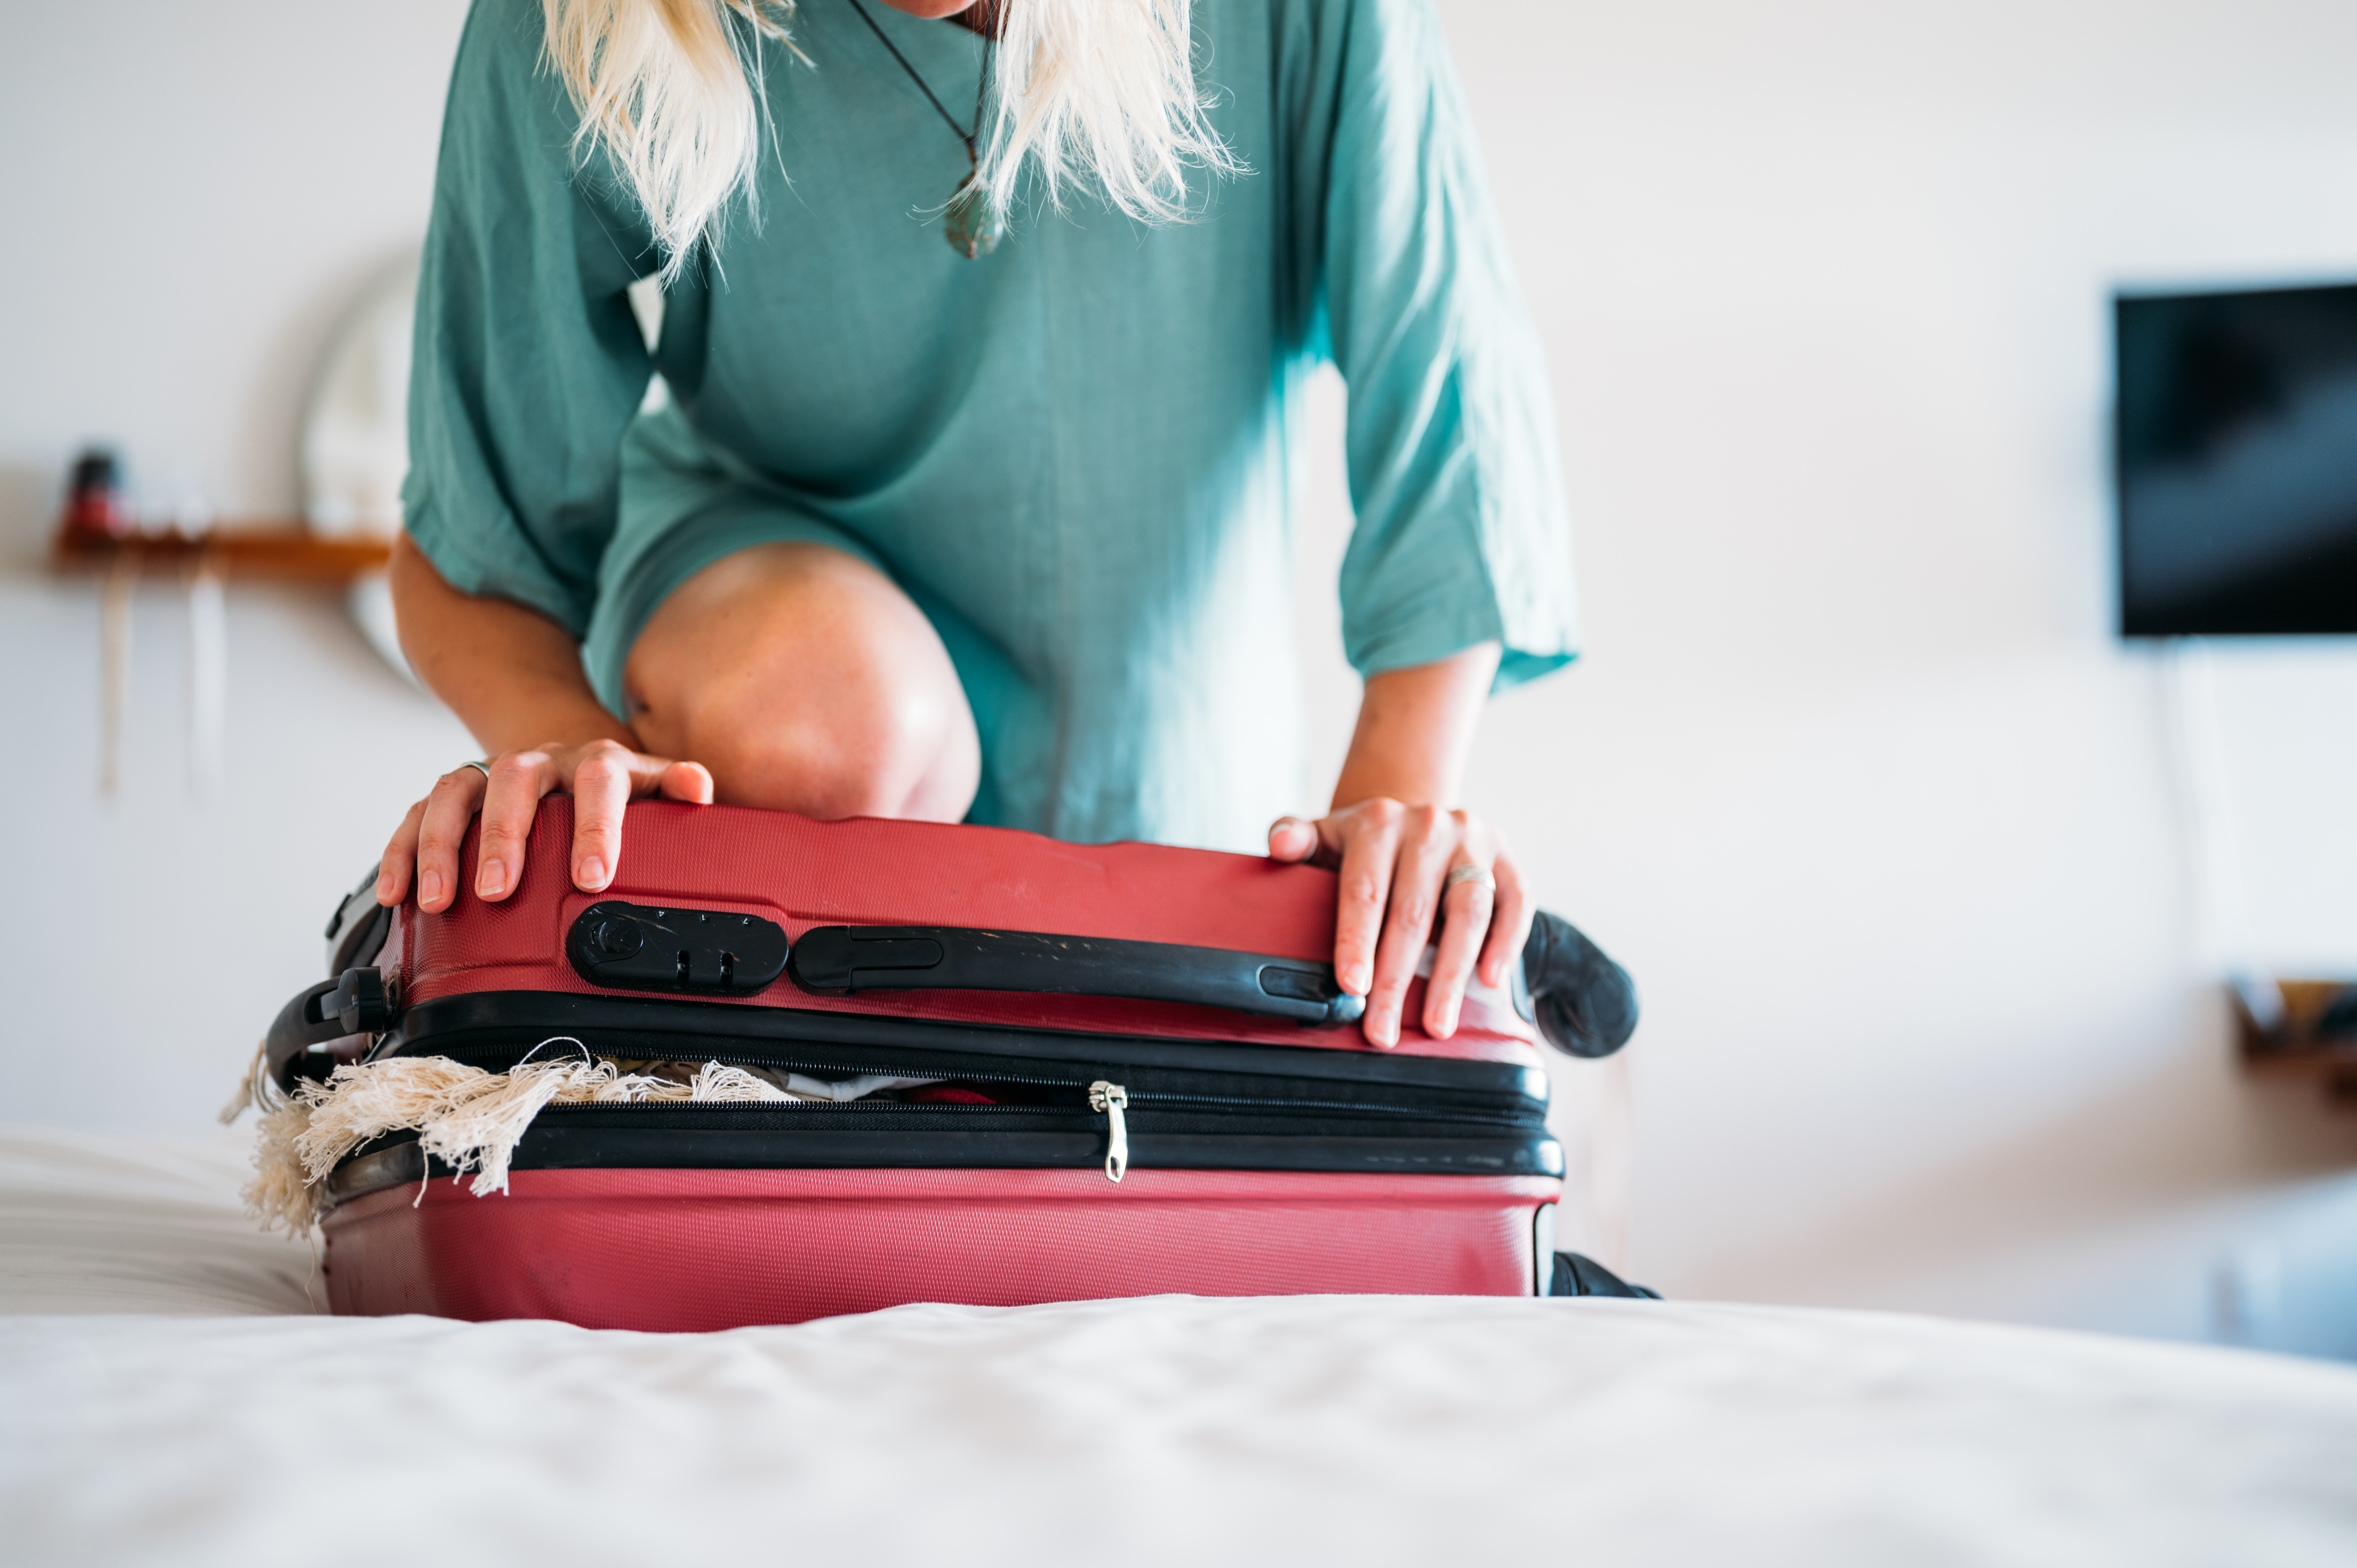 Trying to fit your luggage into a carry-on suitcase can be a nightmare